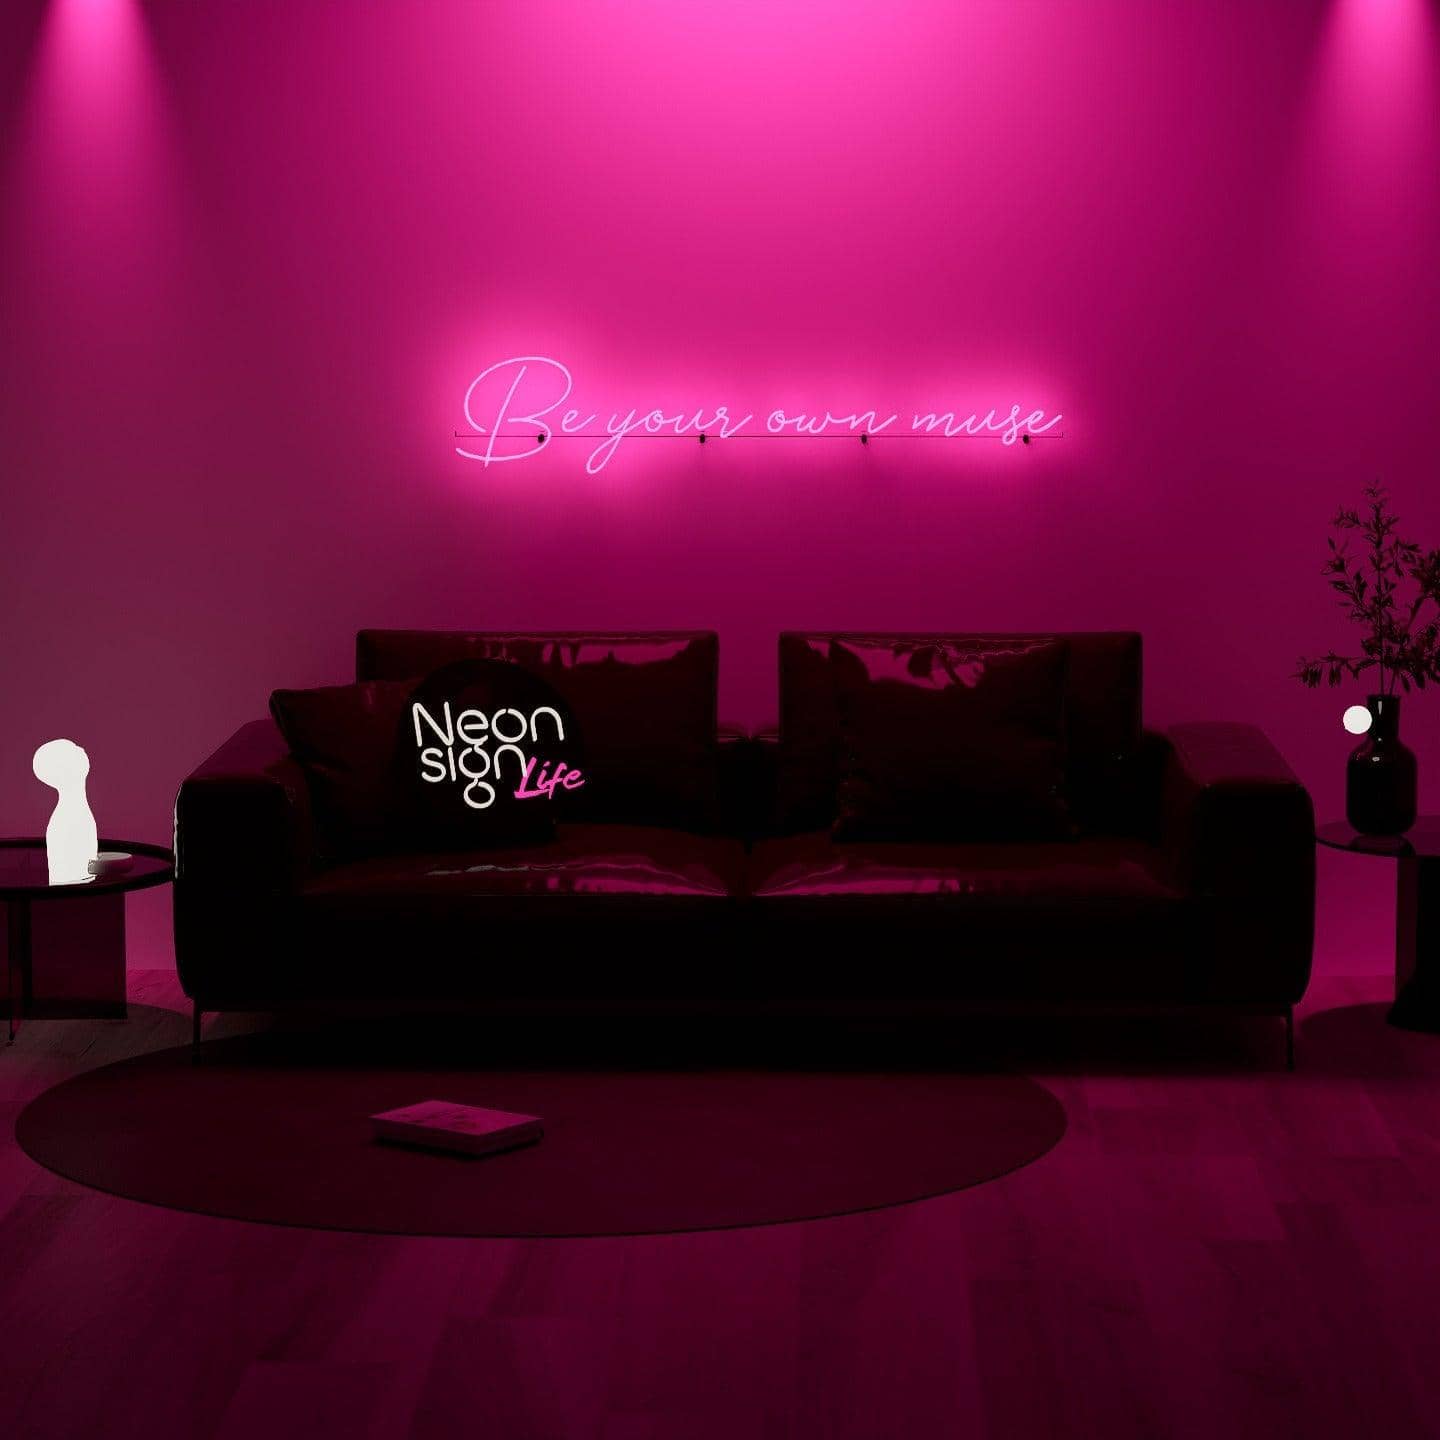 dark-night-lit-pink-neon-lights-hanging-on-the-wall-for-display-be-your-own-muse